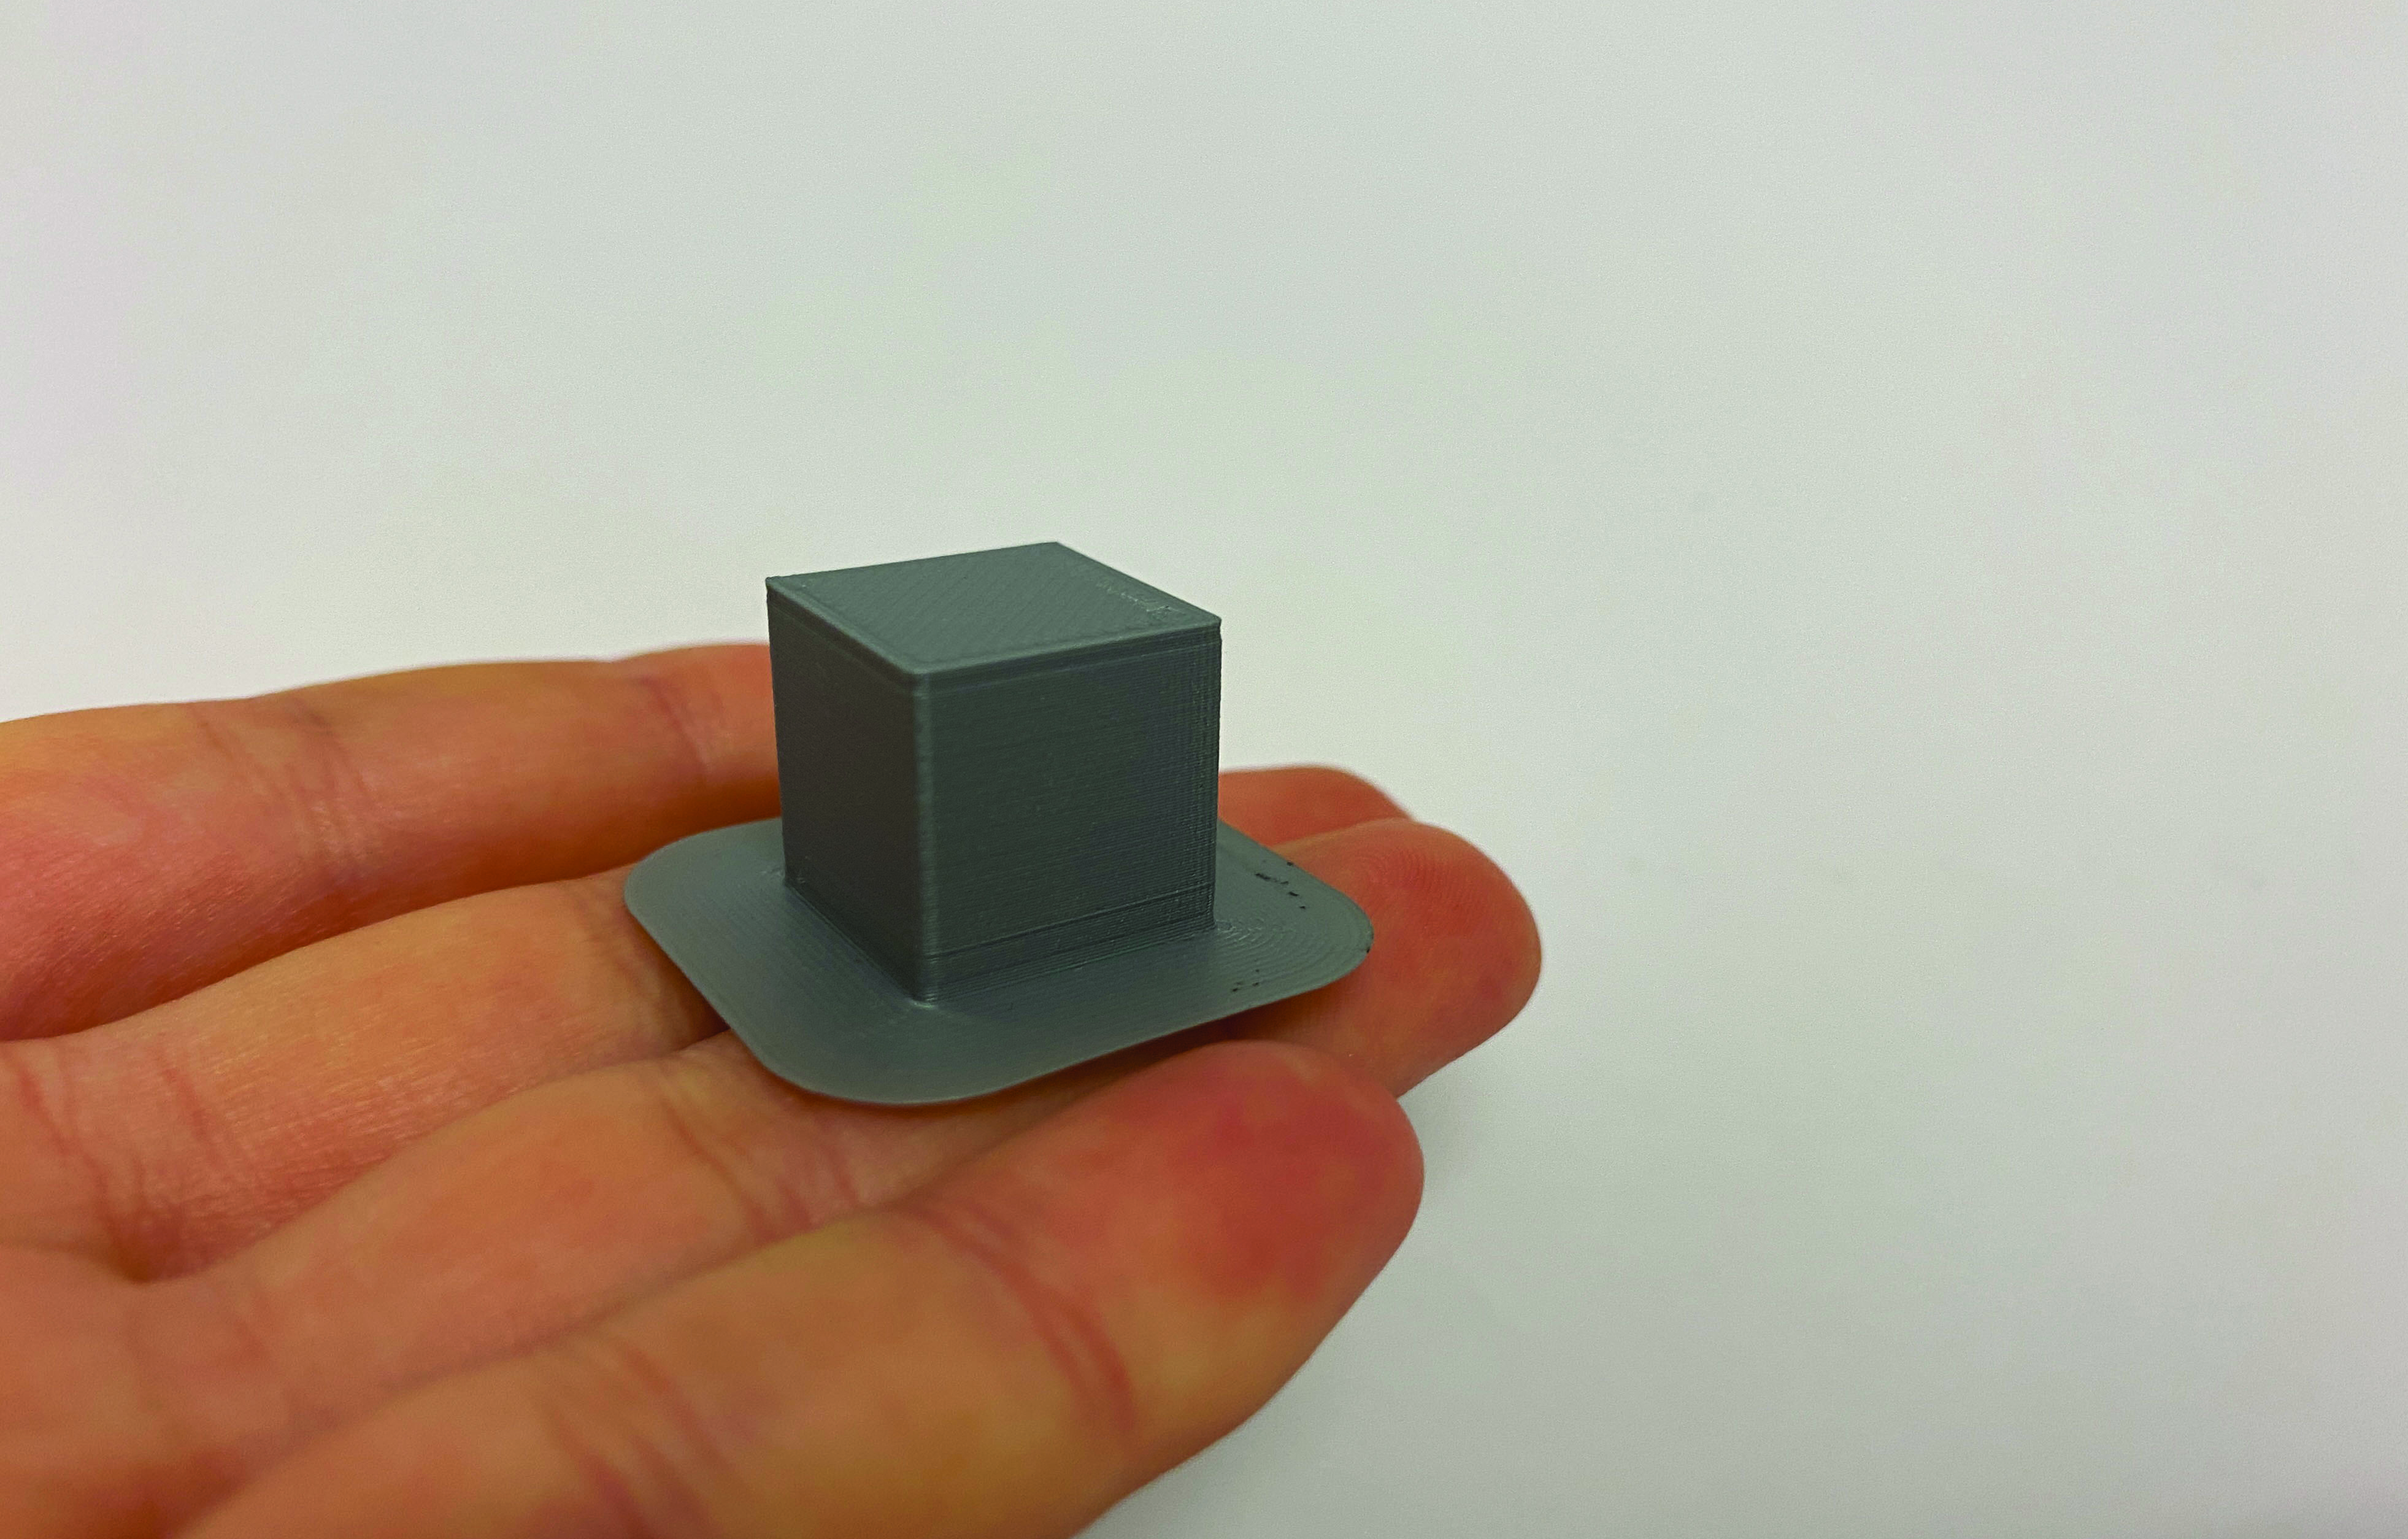 3D printed grey cube on a hand